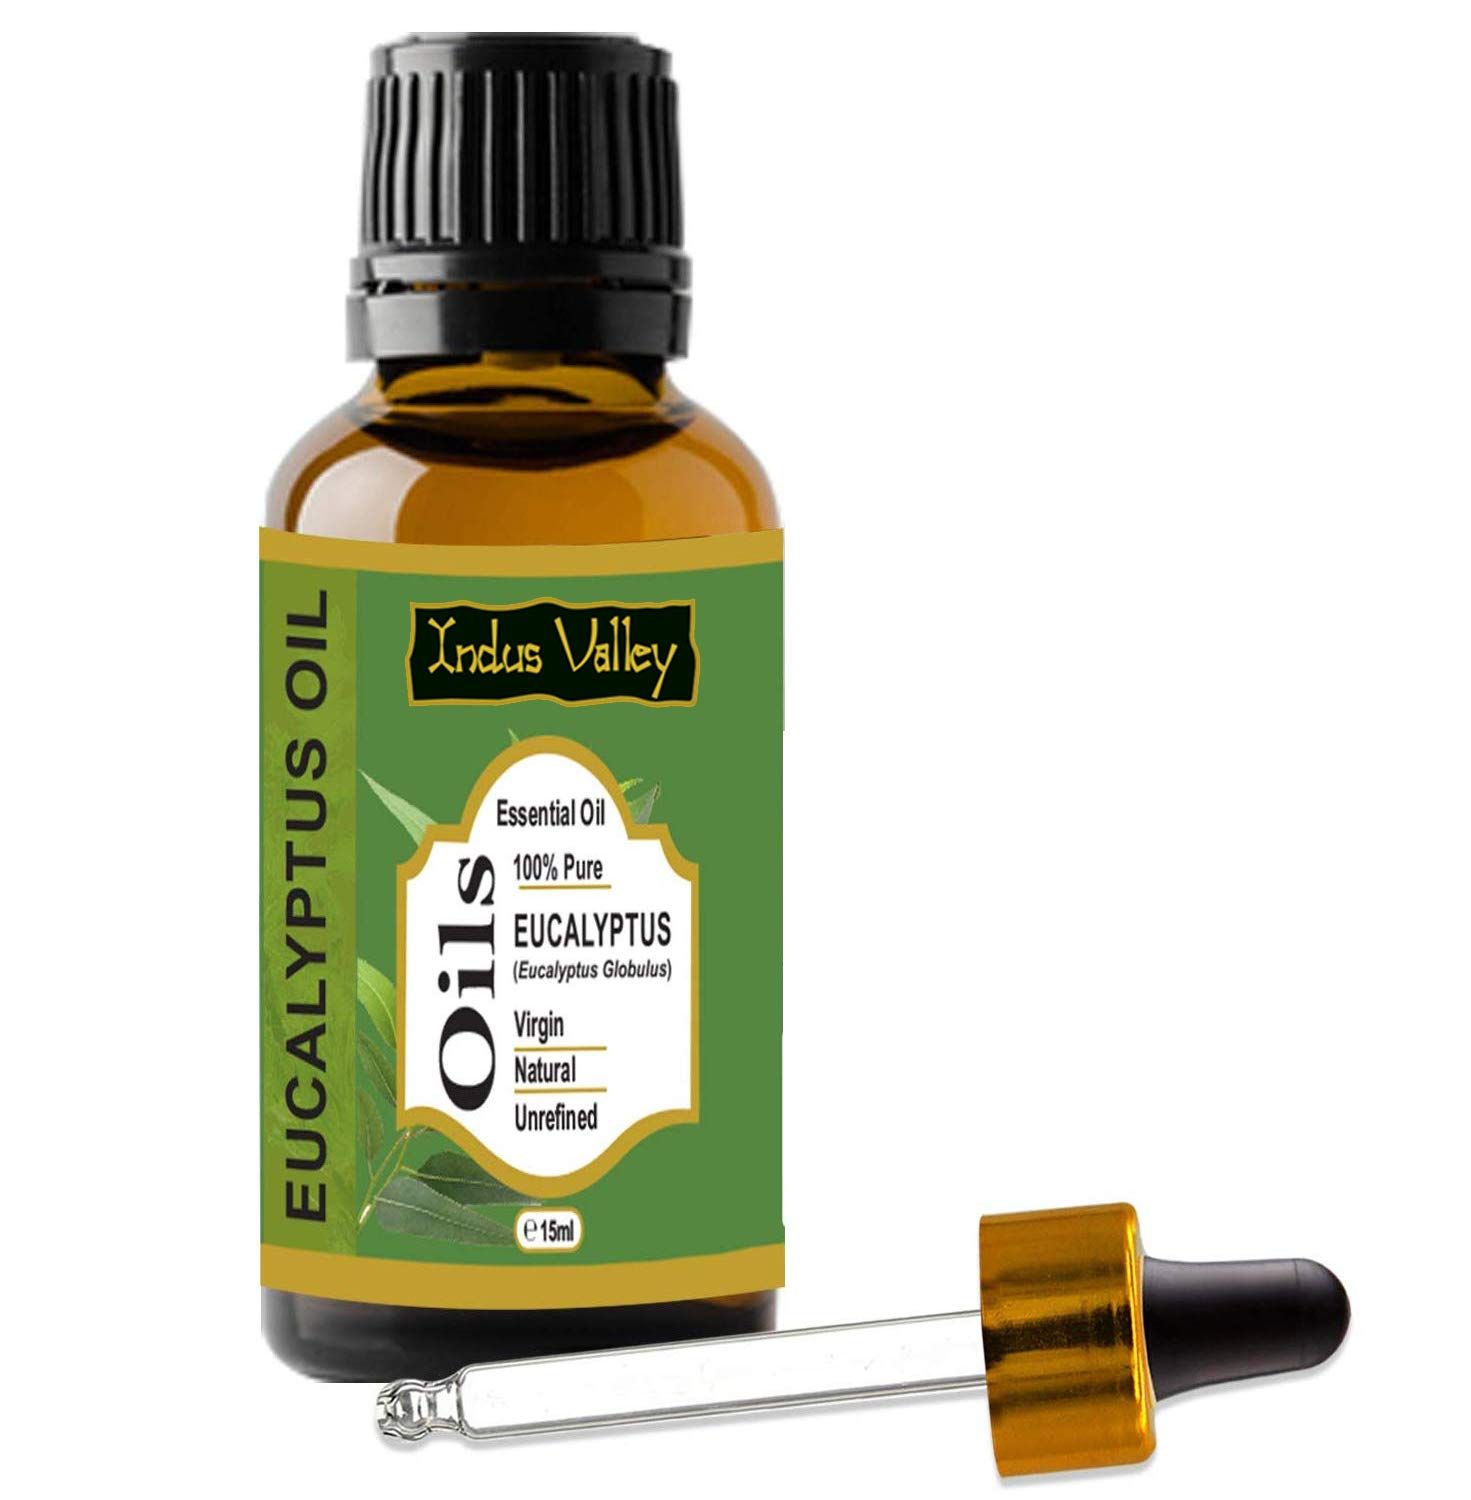 Buy Indus Valley 100% Natural & Organic, Eucalyptus Essential Oil & Dropper for Skin, Hair Care (15 ml) - Purplle